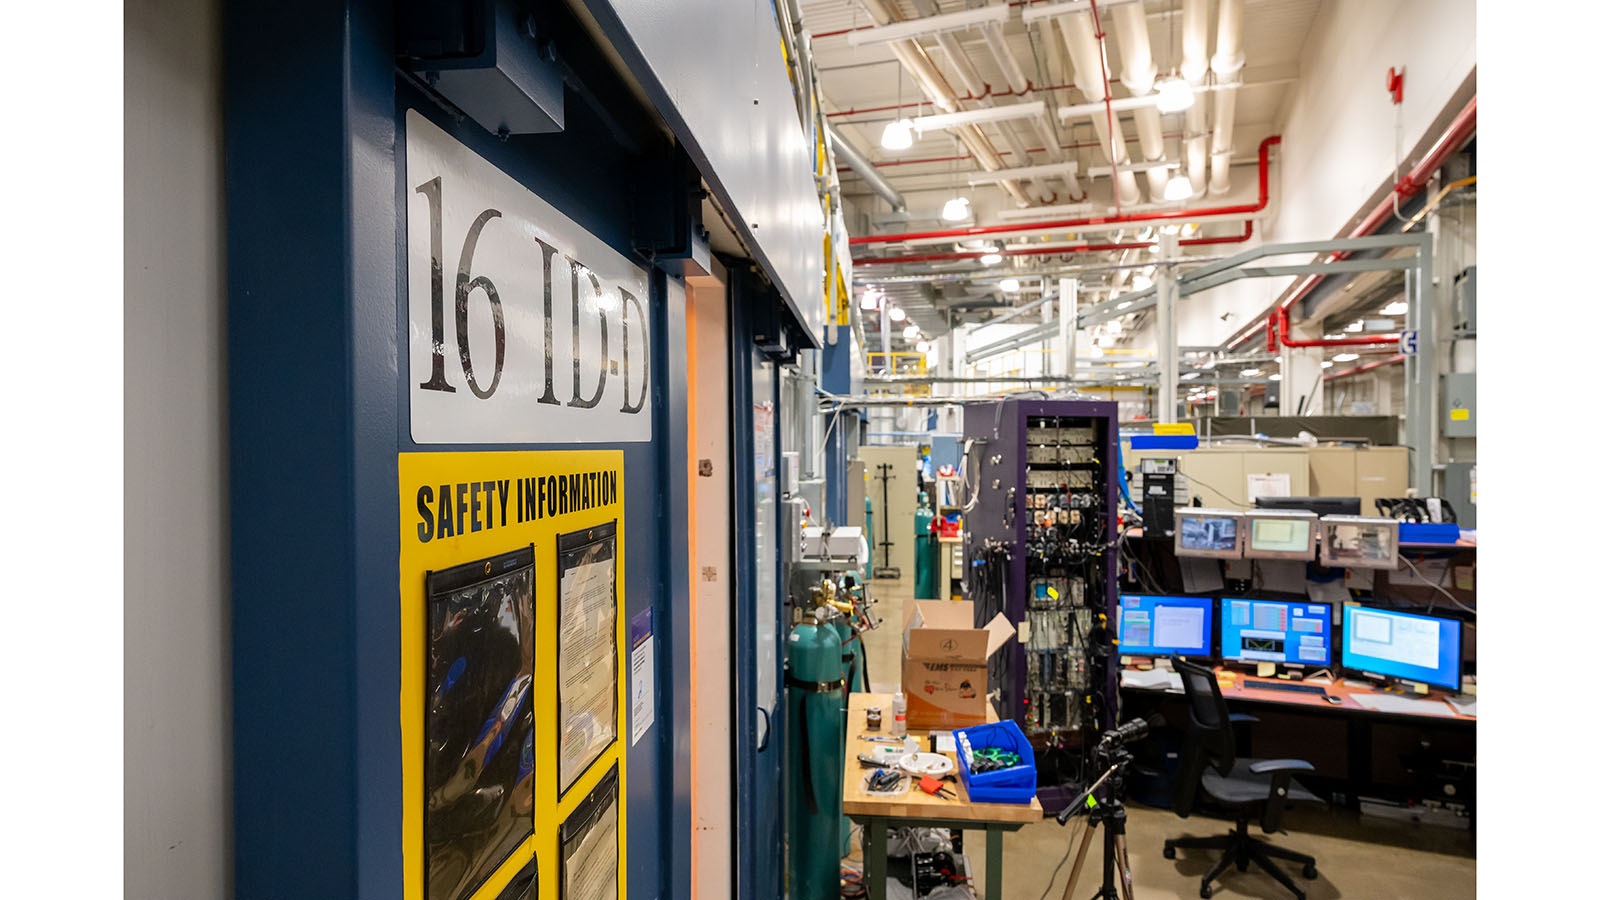 This year, Bolingbrook has utilized Argonne’s high-tech facilities to conduct research into the structure and bonding of carbons. (Image by Mark Lopez.)